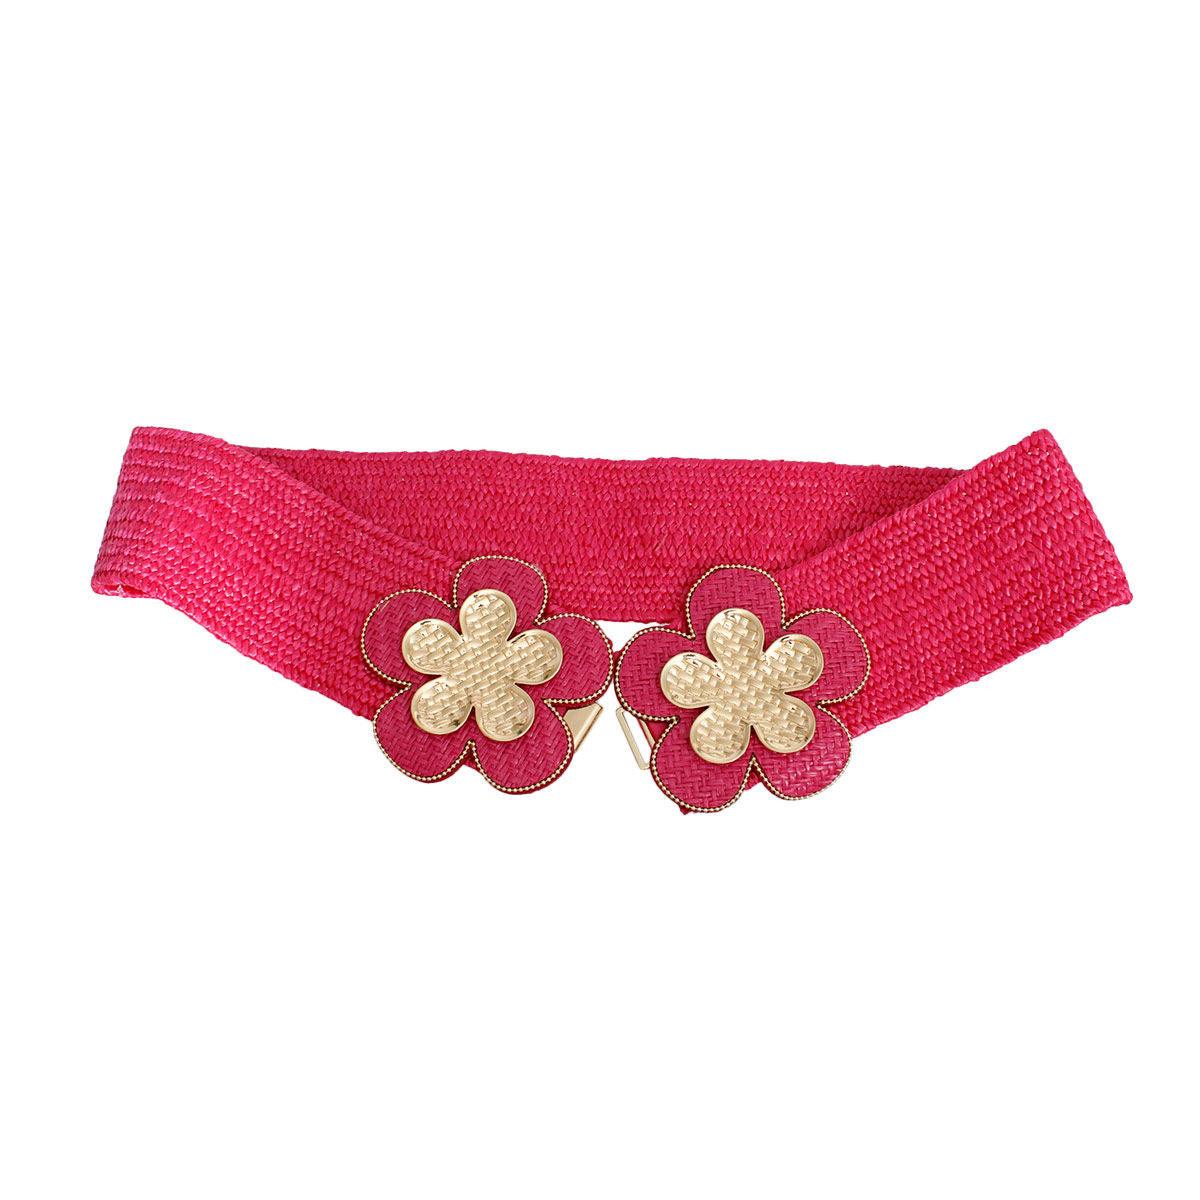 Fuchsia Raffia Belt with Gold Flower Buckle and Textured Detailing for Women